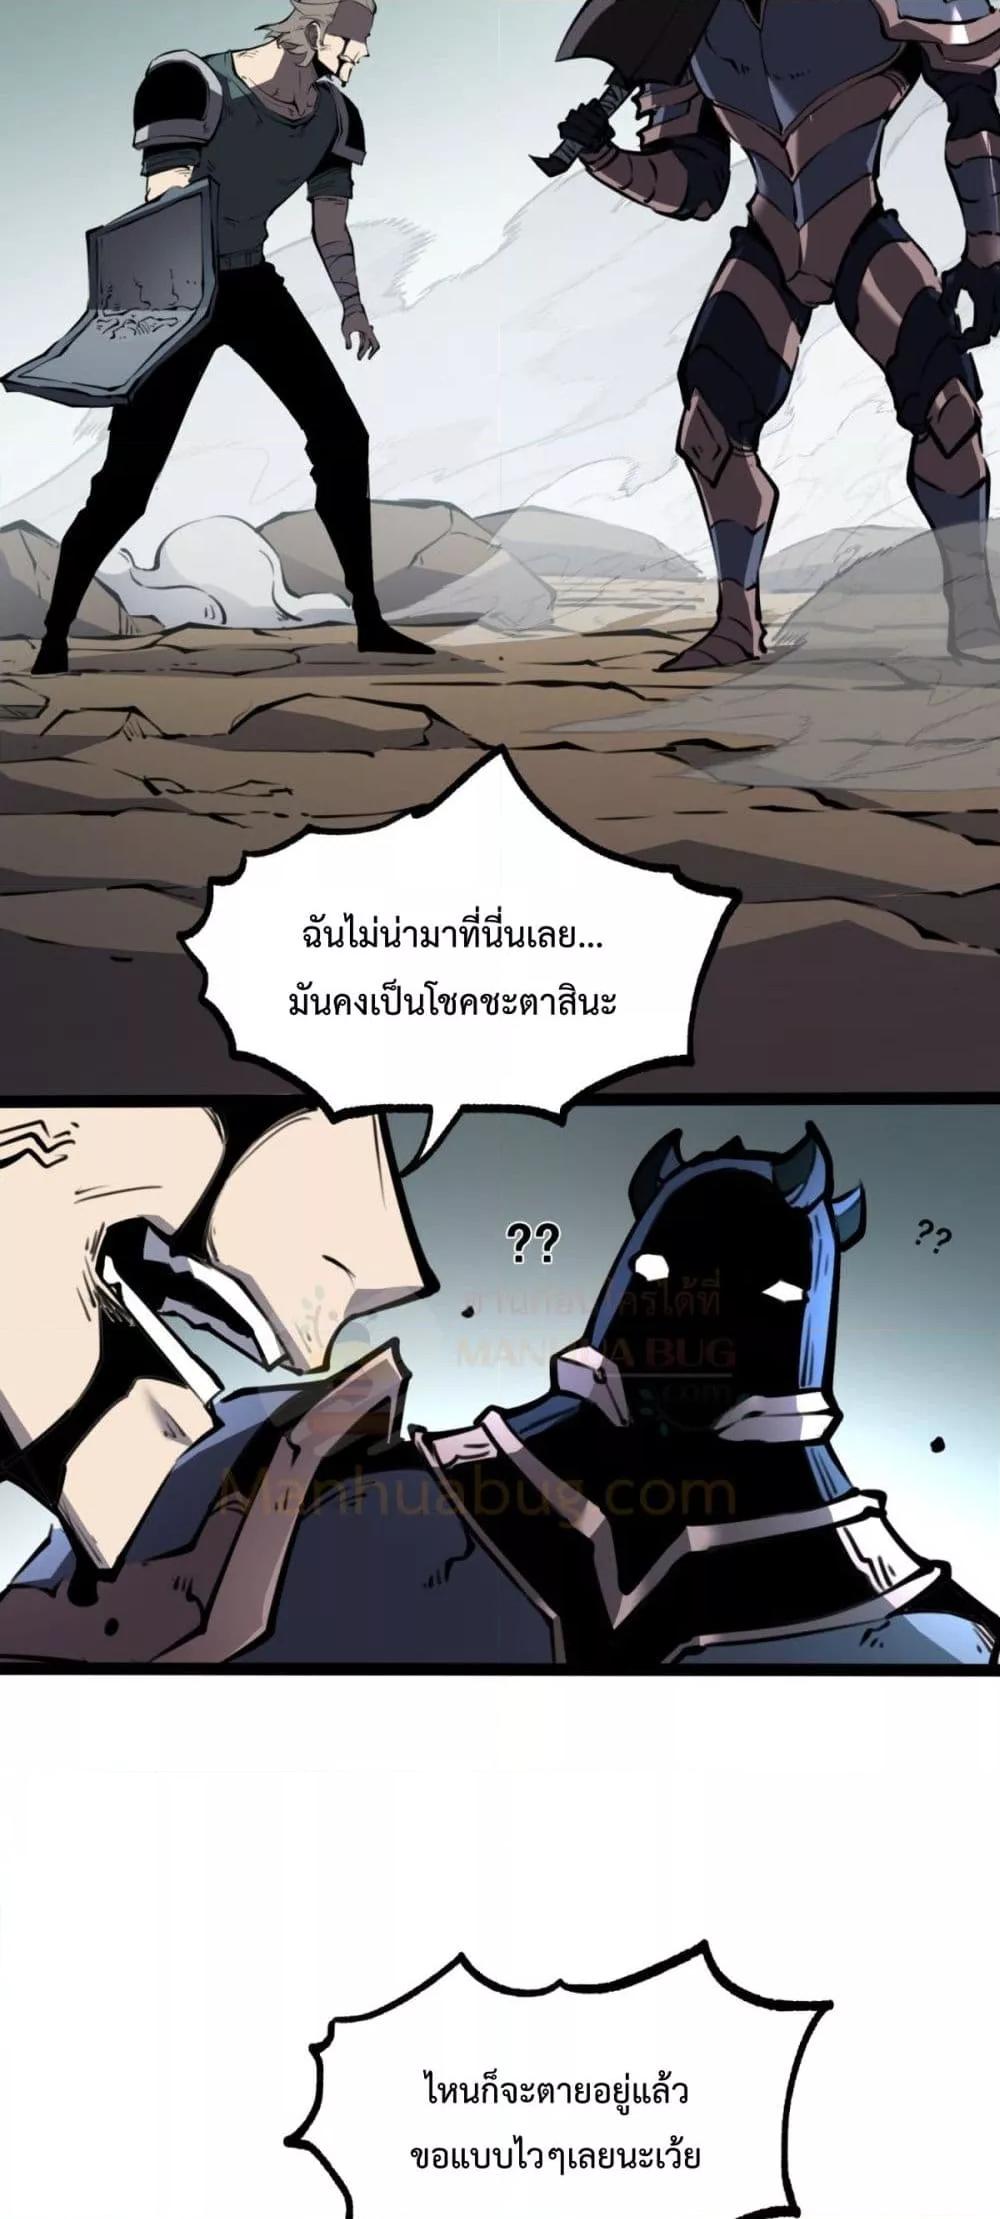 I Became The King by Scavenging โ€“ เนเธเนเธฅเน เน€เธฅเน€เธงเนเธฅเธฅเธฃเธดเนเธ เธ•เธญเธเธ—เธตเน 17 (14)